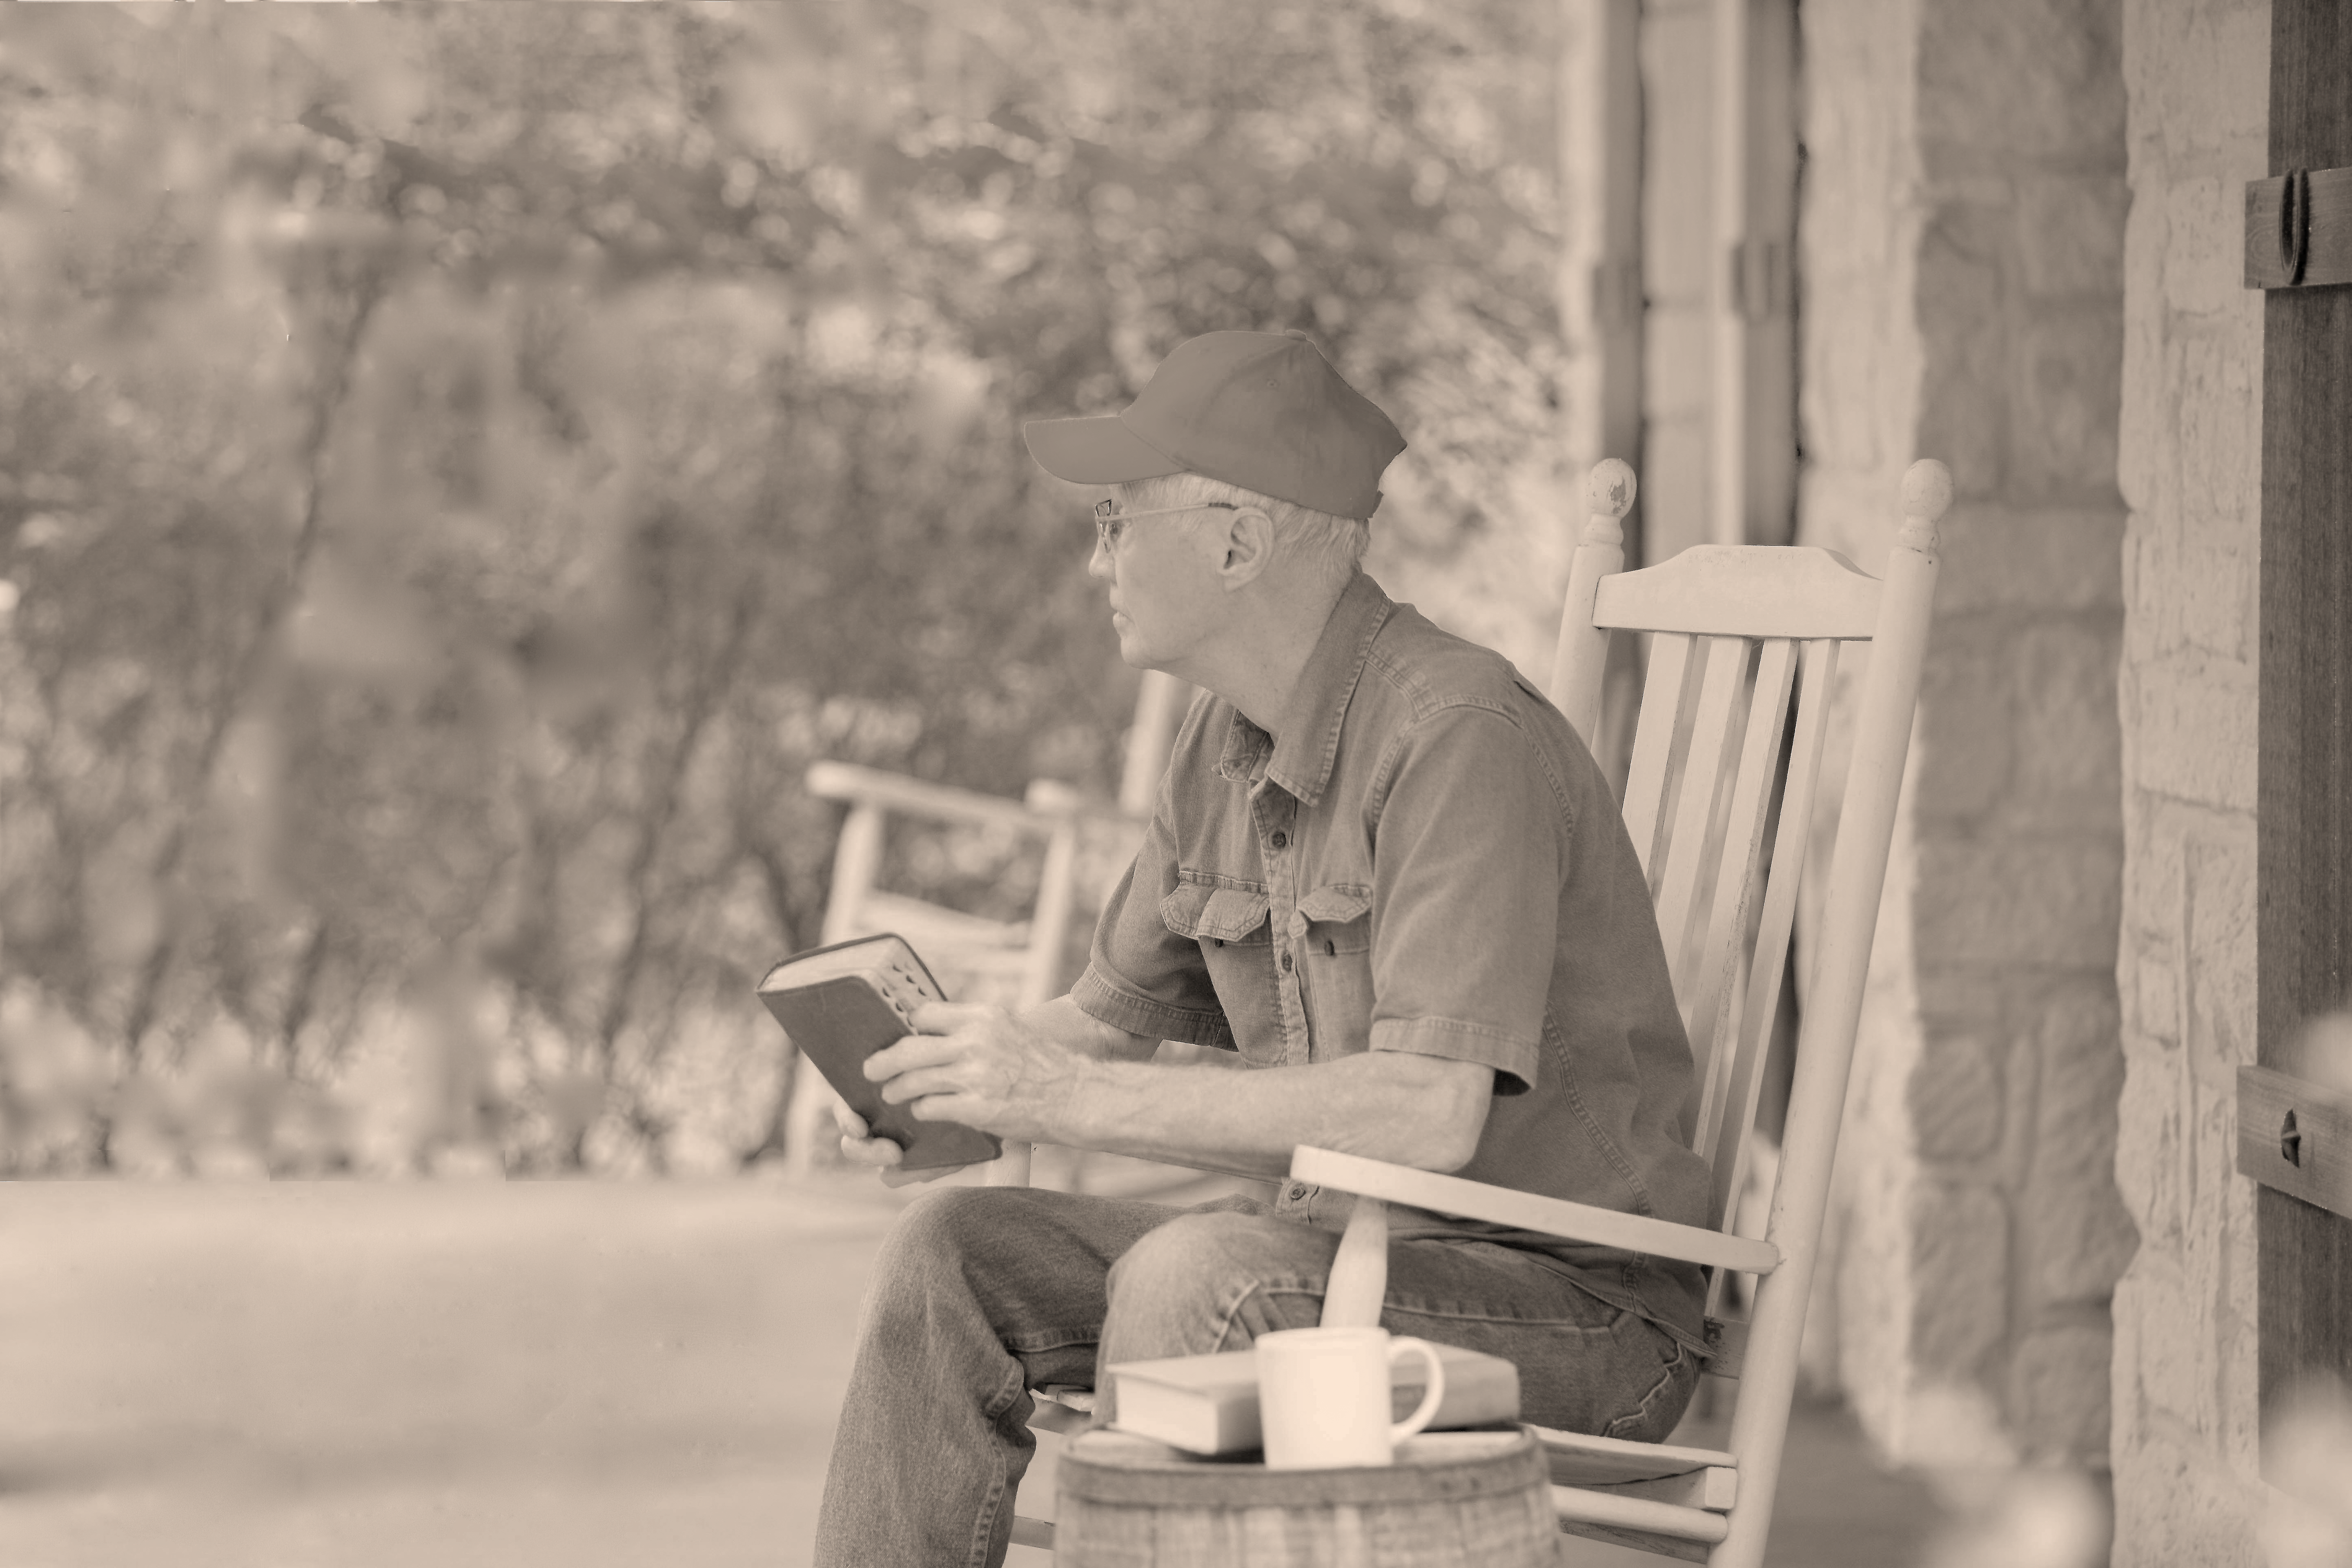 IMAGE: man in rocking chair on porch; appears lost in thought.